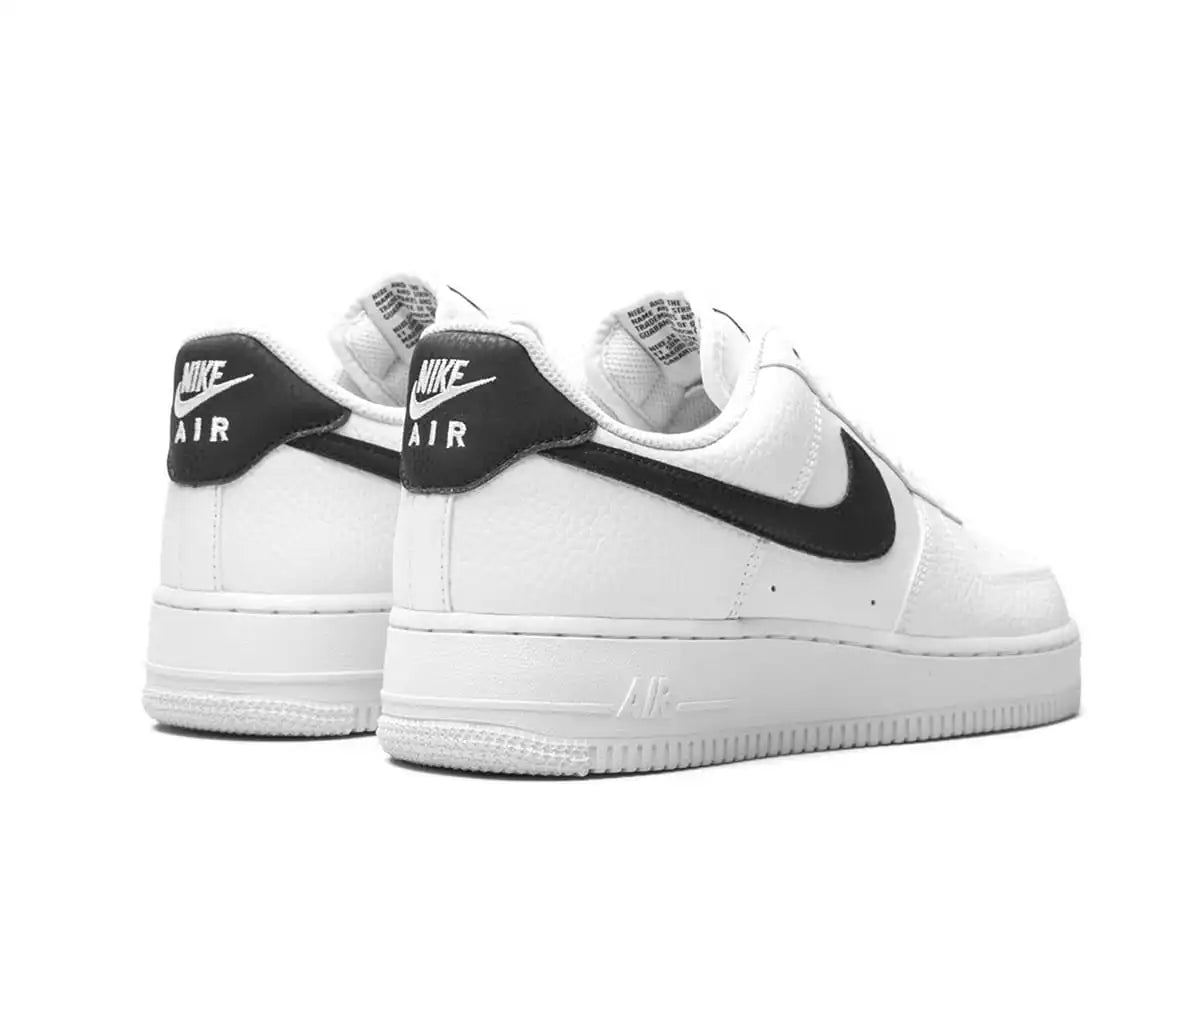 Nike Air Force 1 Low '07 White Black Pebbled Leather 2021 Mens CT2302-100  NEW